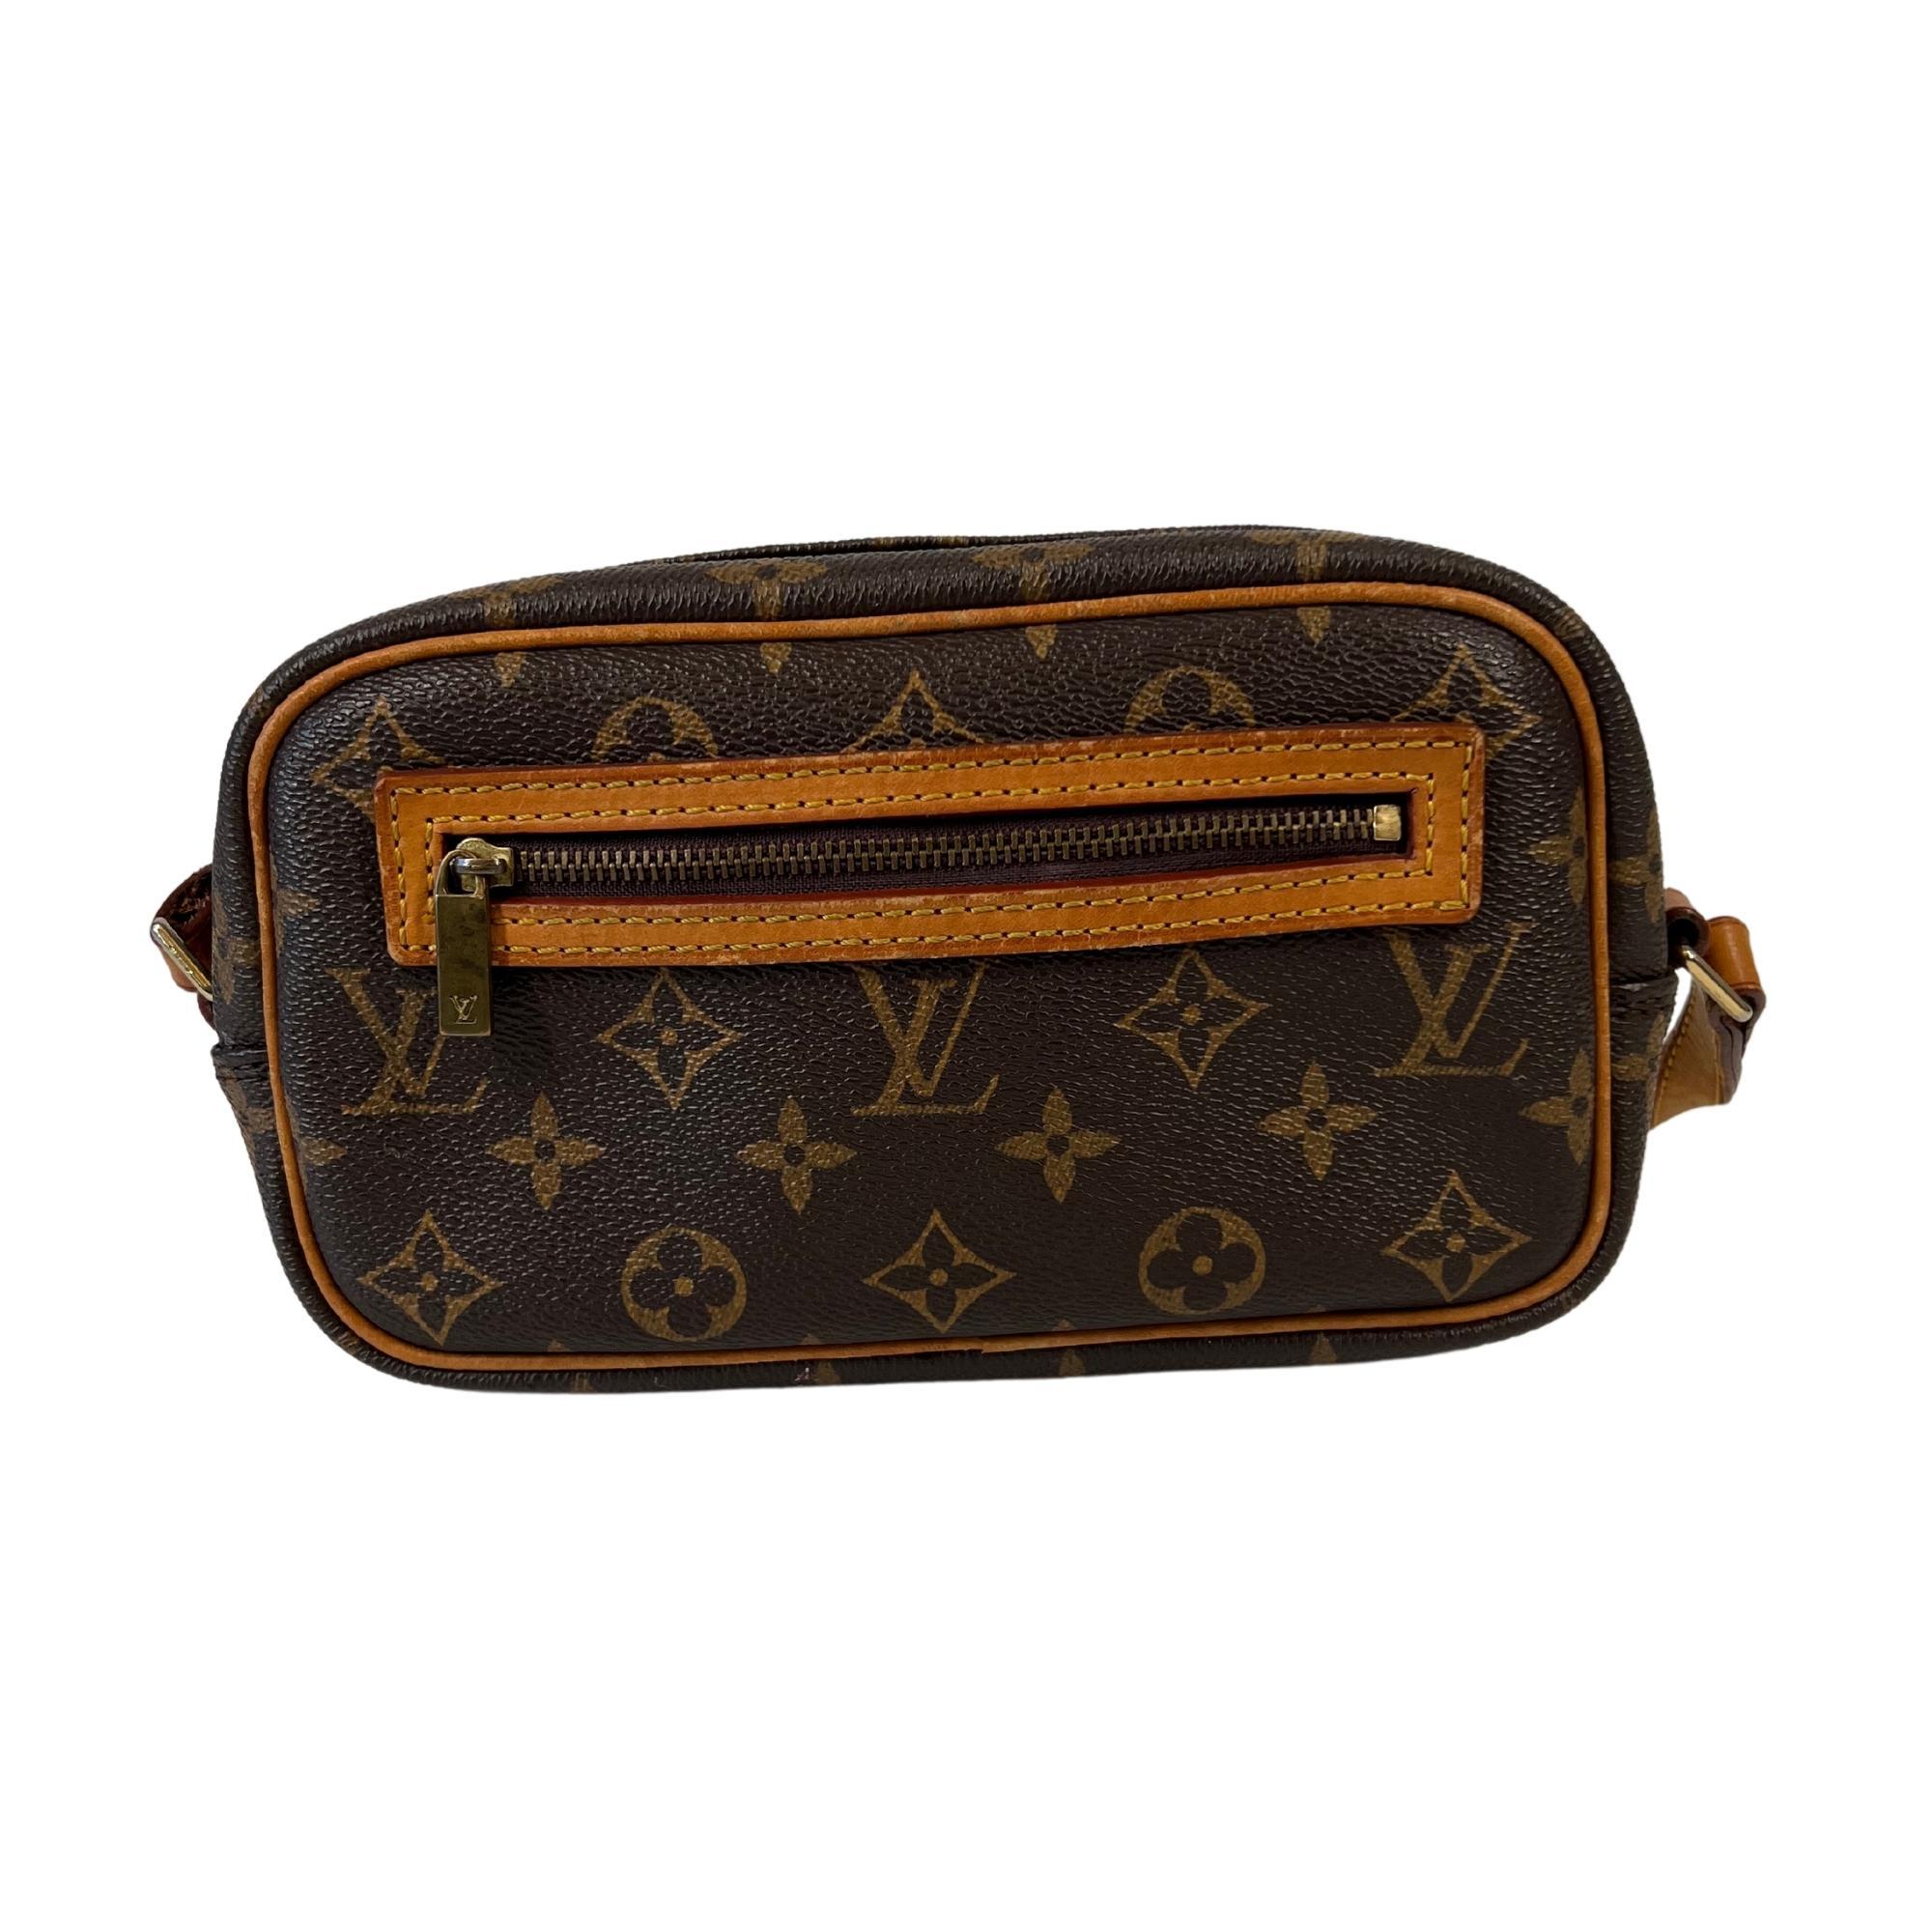 This Louis Vuitton bag is made of coated canvas with monogram print and features vachetta leather details, flat leather shoulder strap, top zip closure and terra cotta cross grain leather interior with a slip pocket.

COLOR: Brown
MATERIAL: Coated